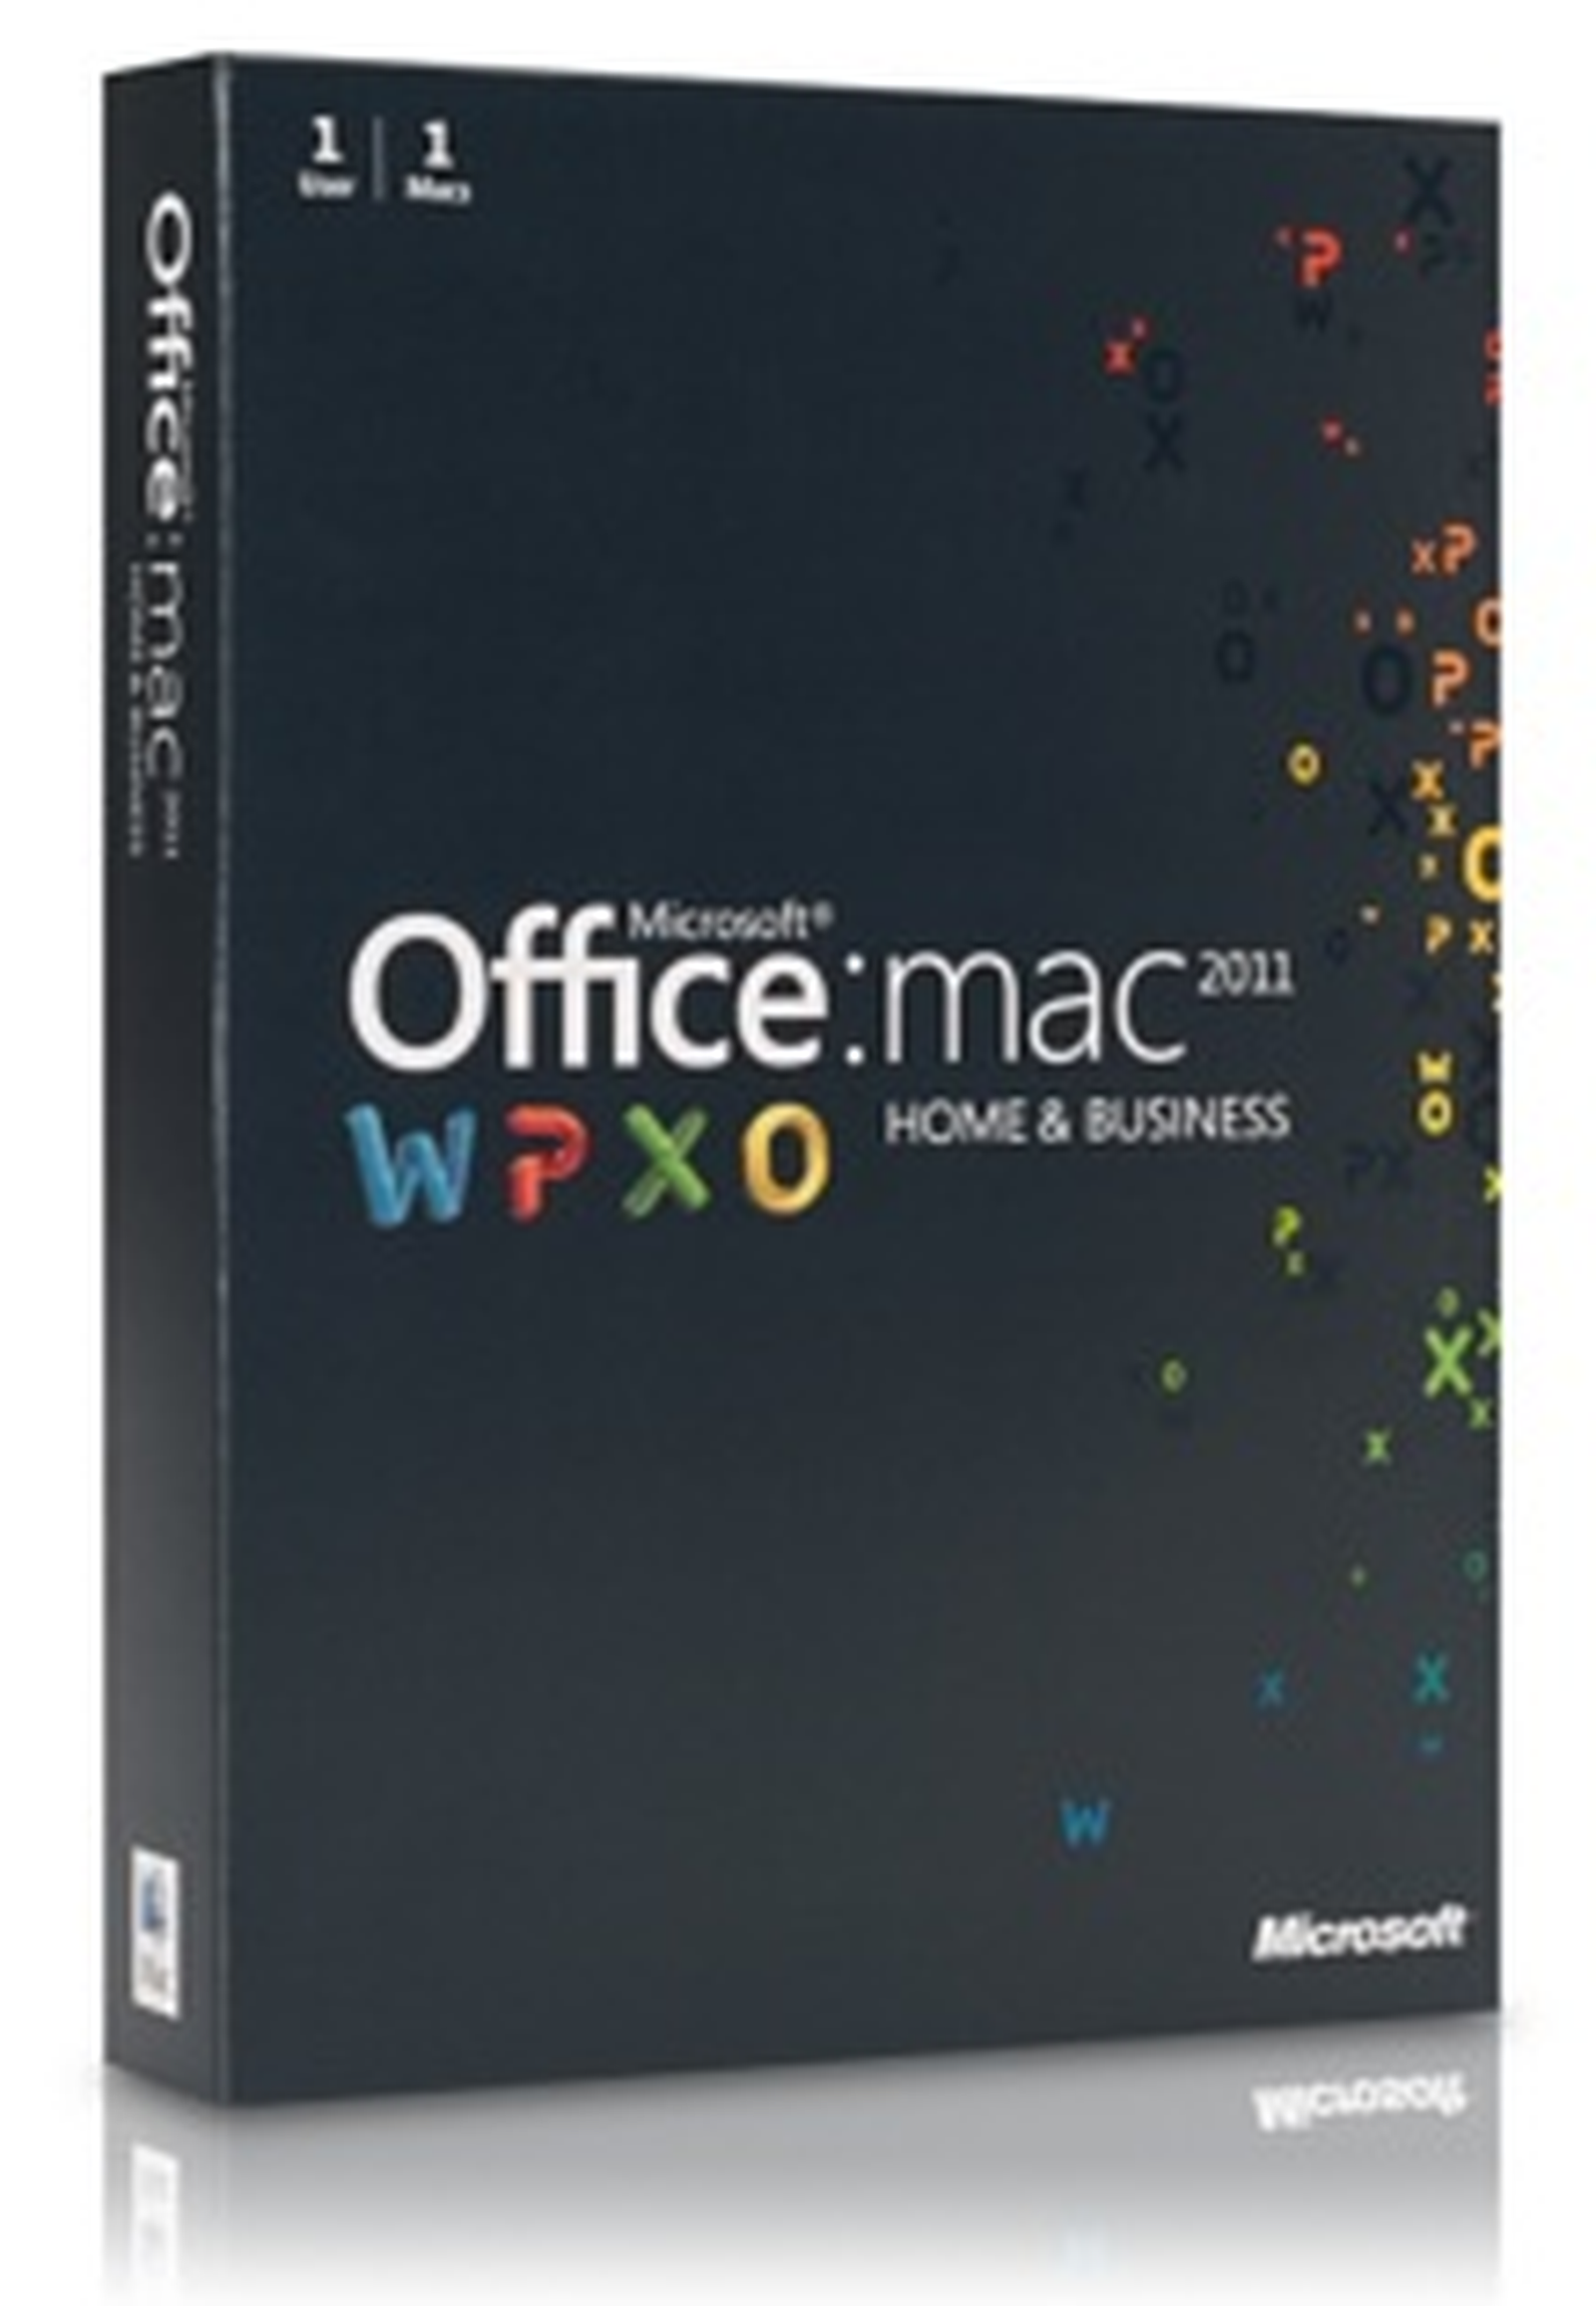 updating office 2008 for mac